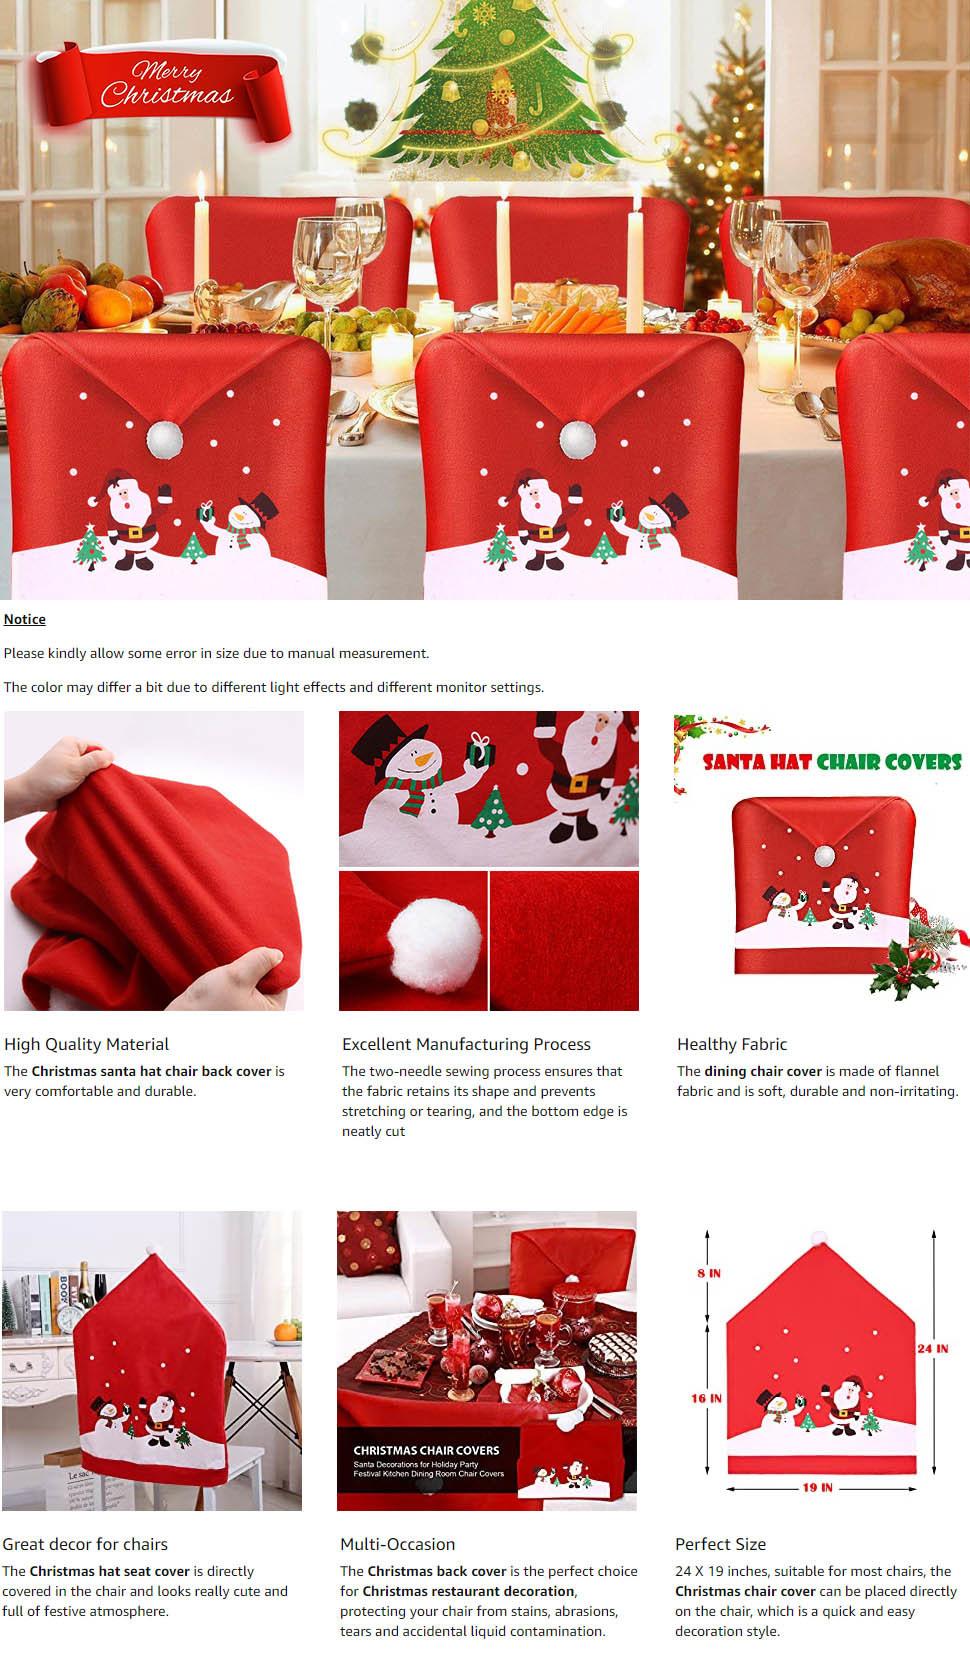 New Pack Santa Claus Hat Christmas Chair Covers for Christmas Decorations Dinner Chair Xmas Decor